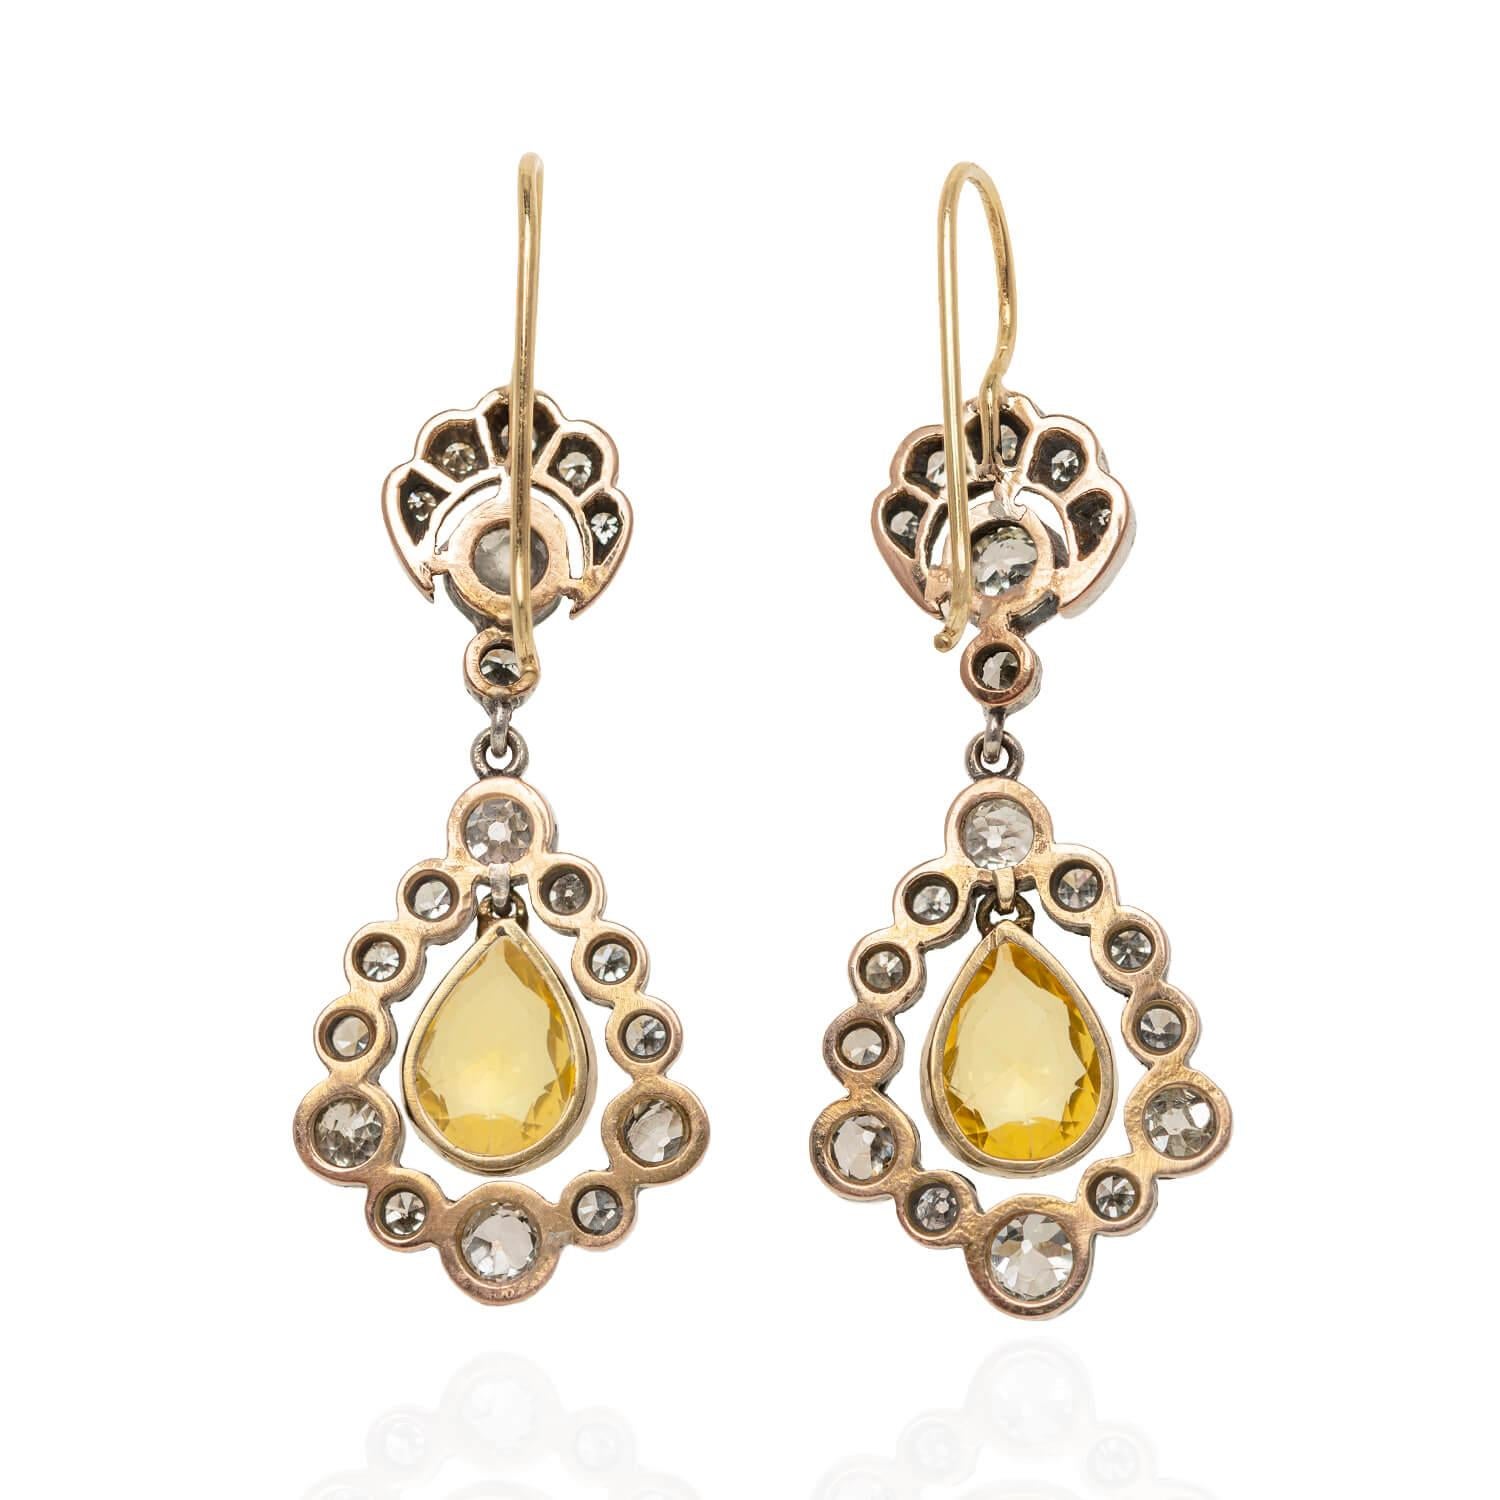 A stunning pair of earrings from the Victorian (ca1880s) era! Crafted in 18kt yellow gold and topped in sterling silver, these incredible earrings begin with an ornate surmount. Five graduated Single Cut diamonds are in a tiara-like frame atop an